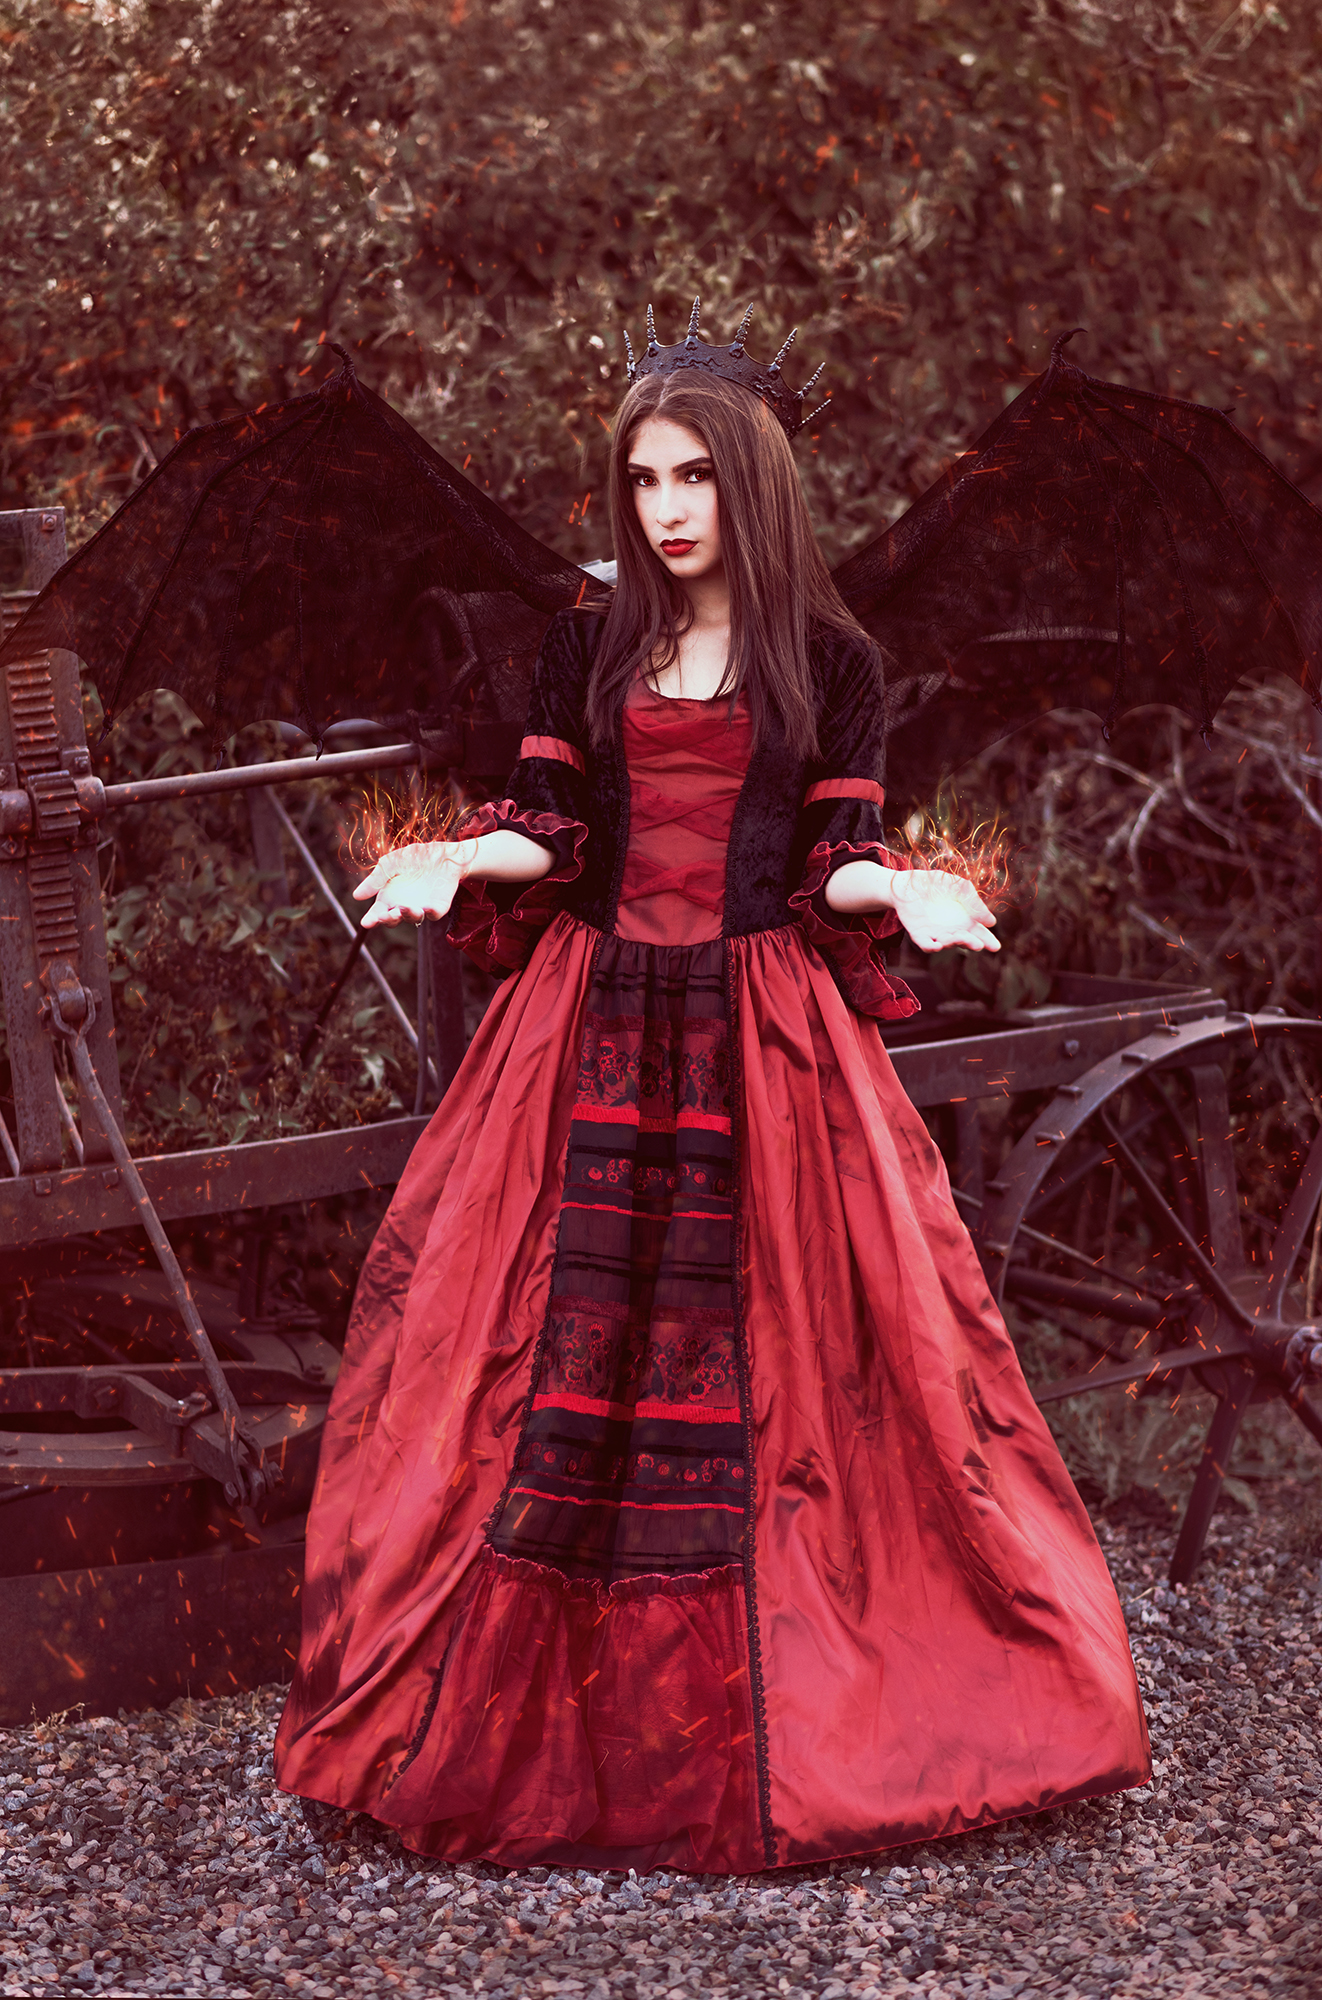 A fantasy photo by Kendra Colleen Photography of a girl dressed as a demon princess in a black and red gown who stands in front of old rusted equipment with black wings spread and flame magic in her outstretched hands.